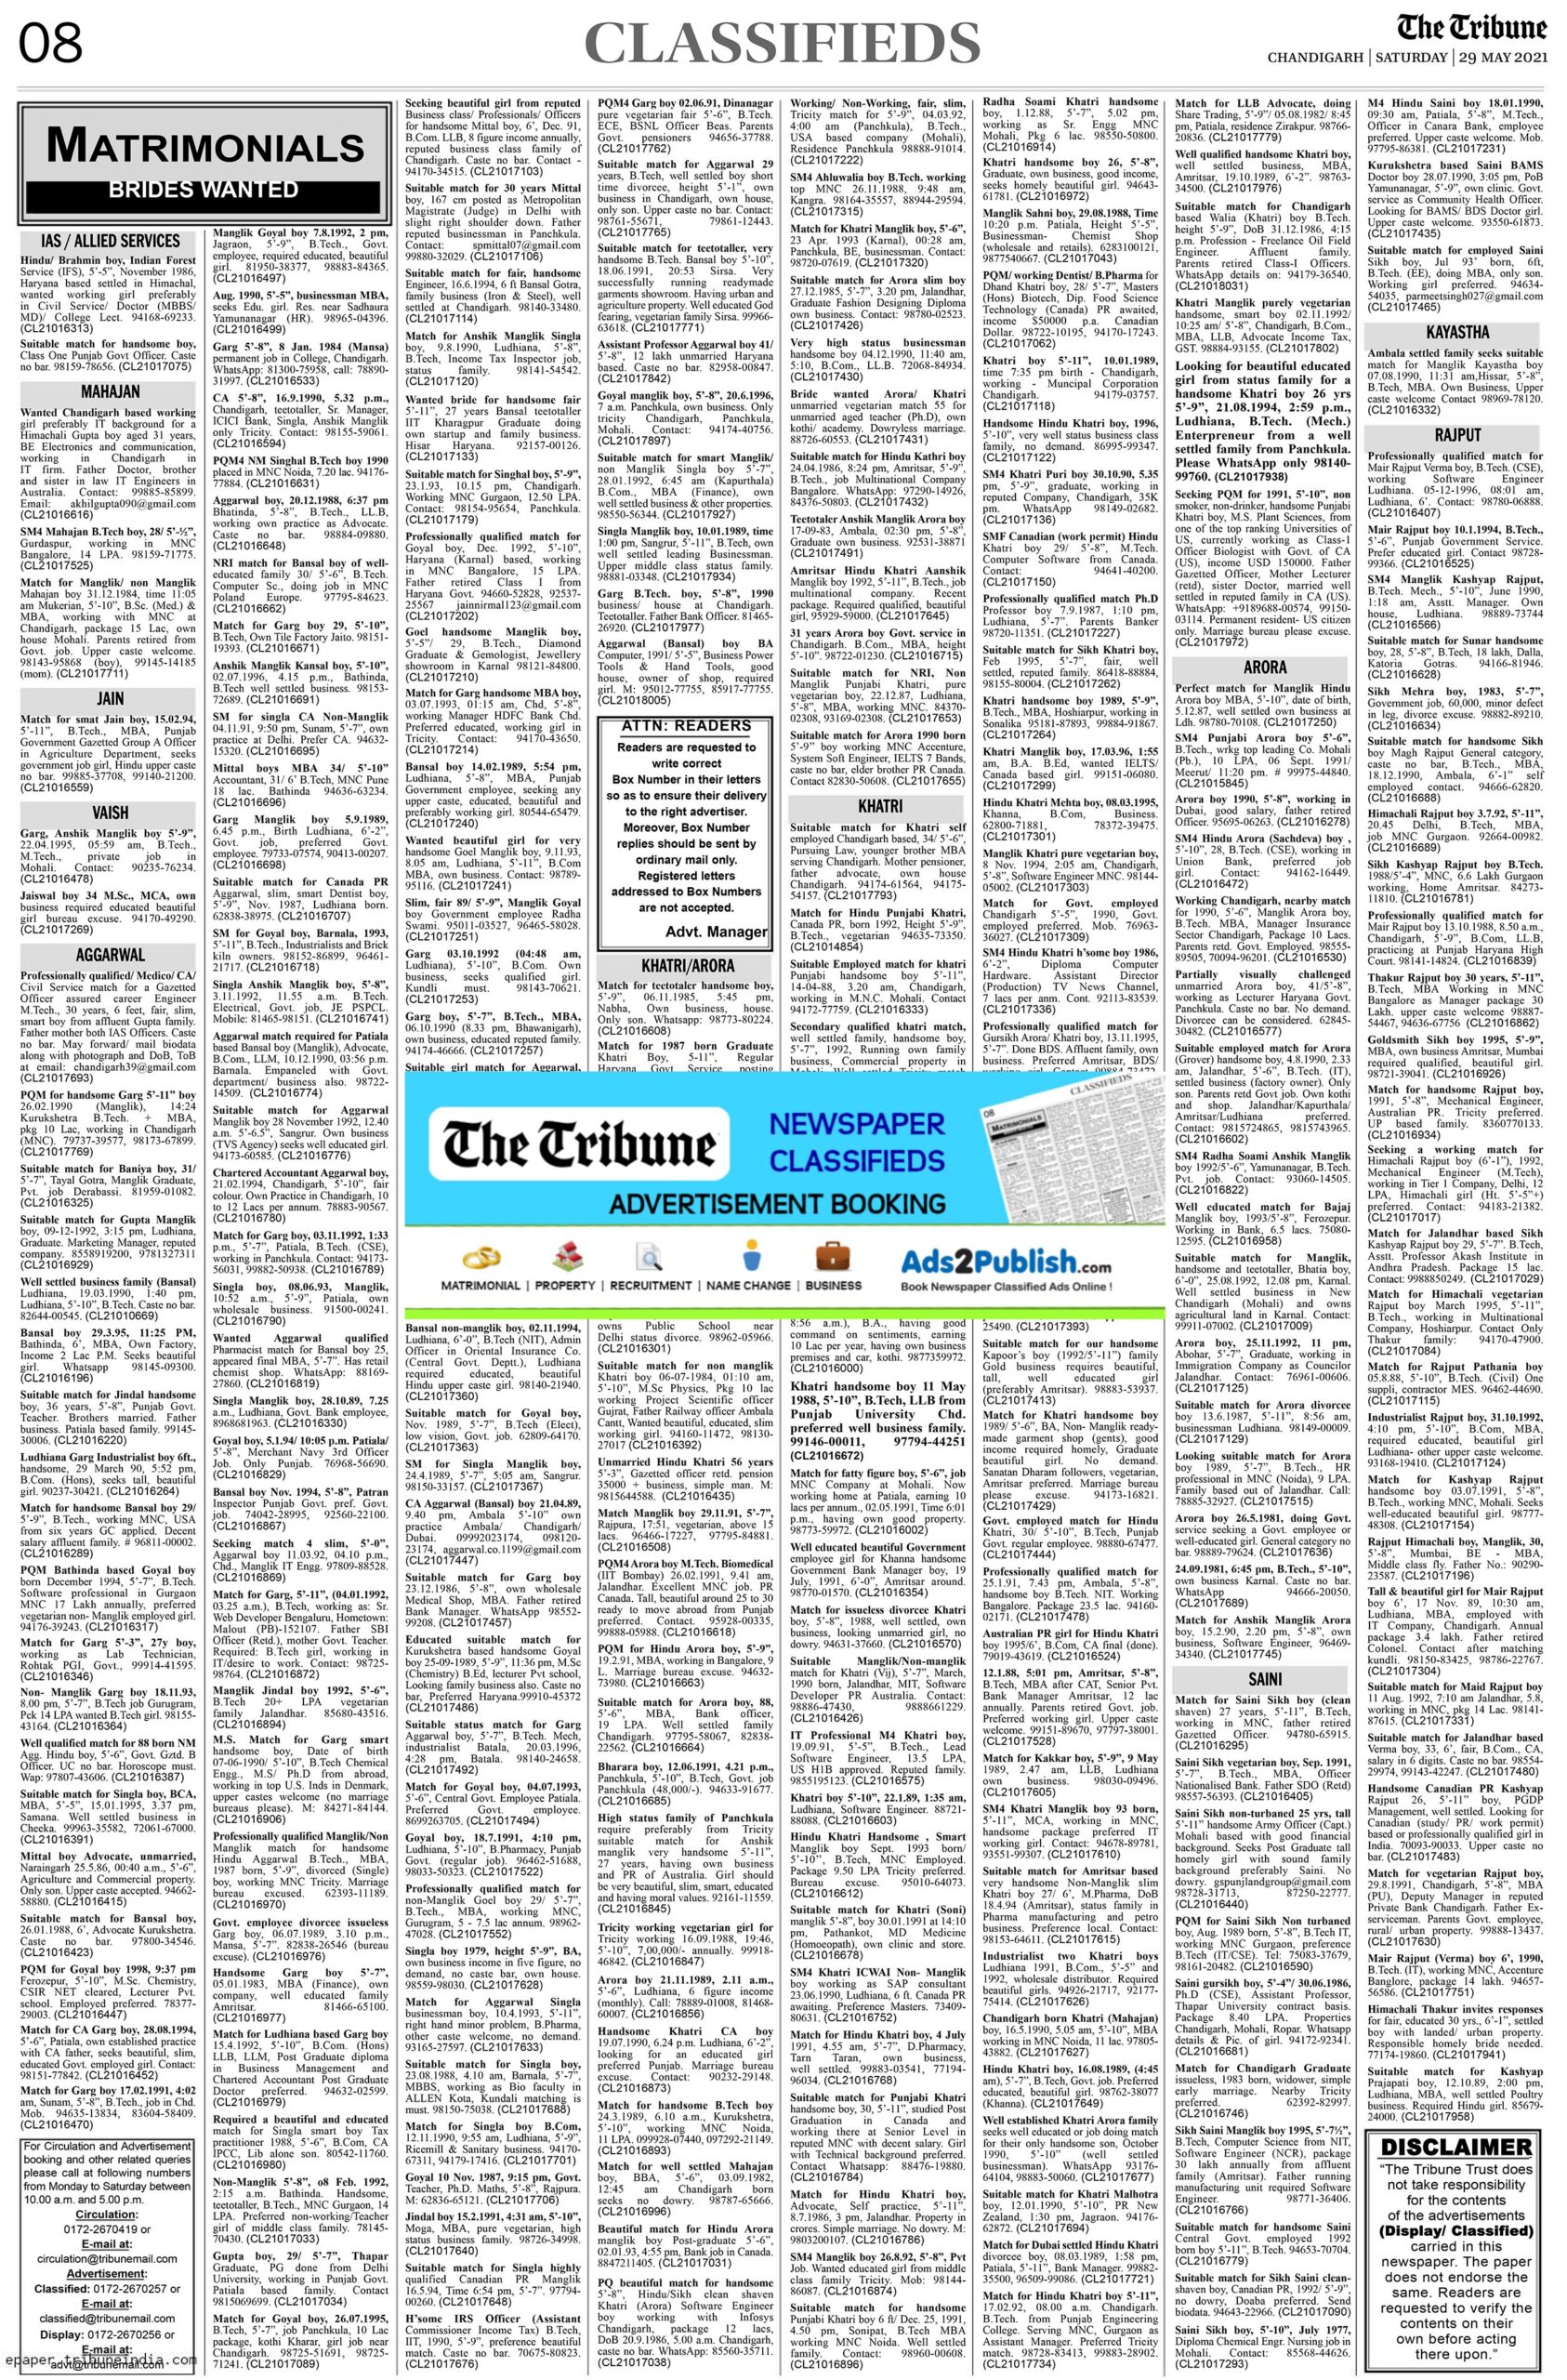 the-tribune-29-5-2021-matrimonial-wanted-bride-classified-paper